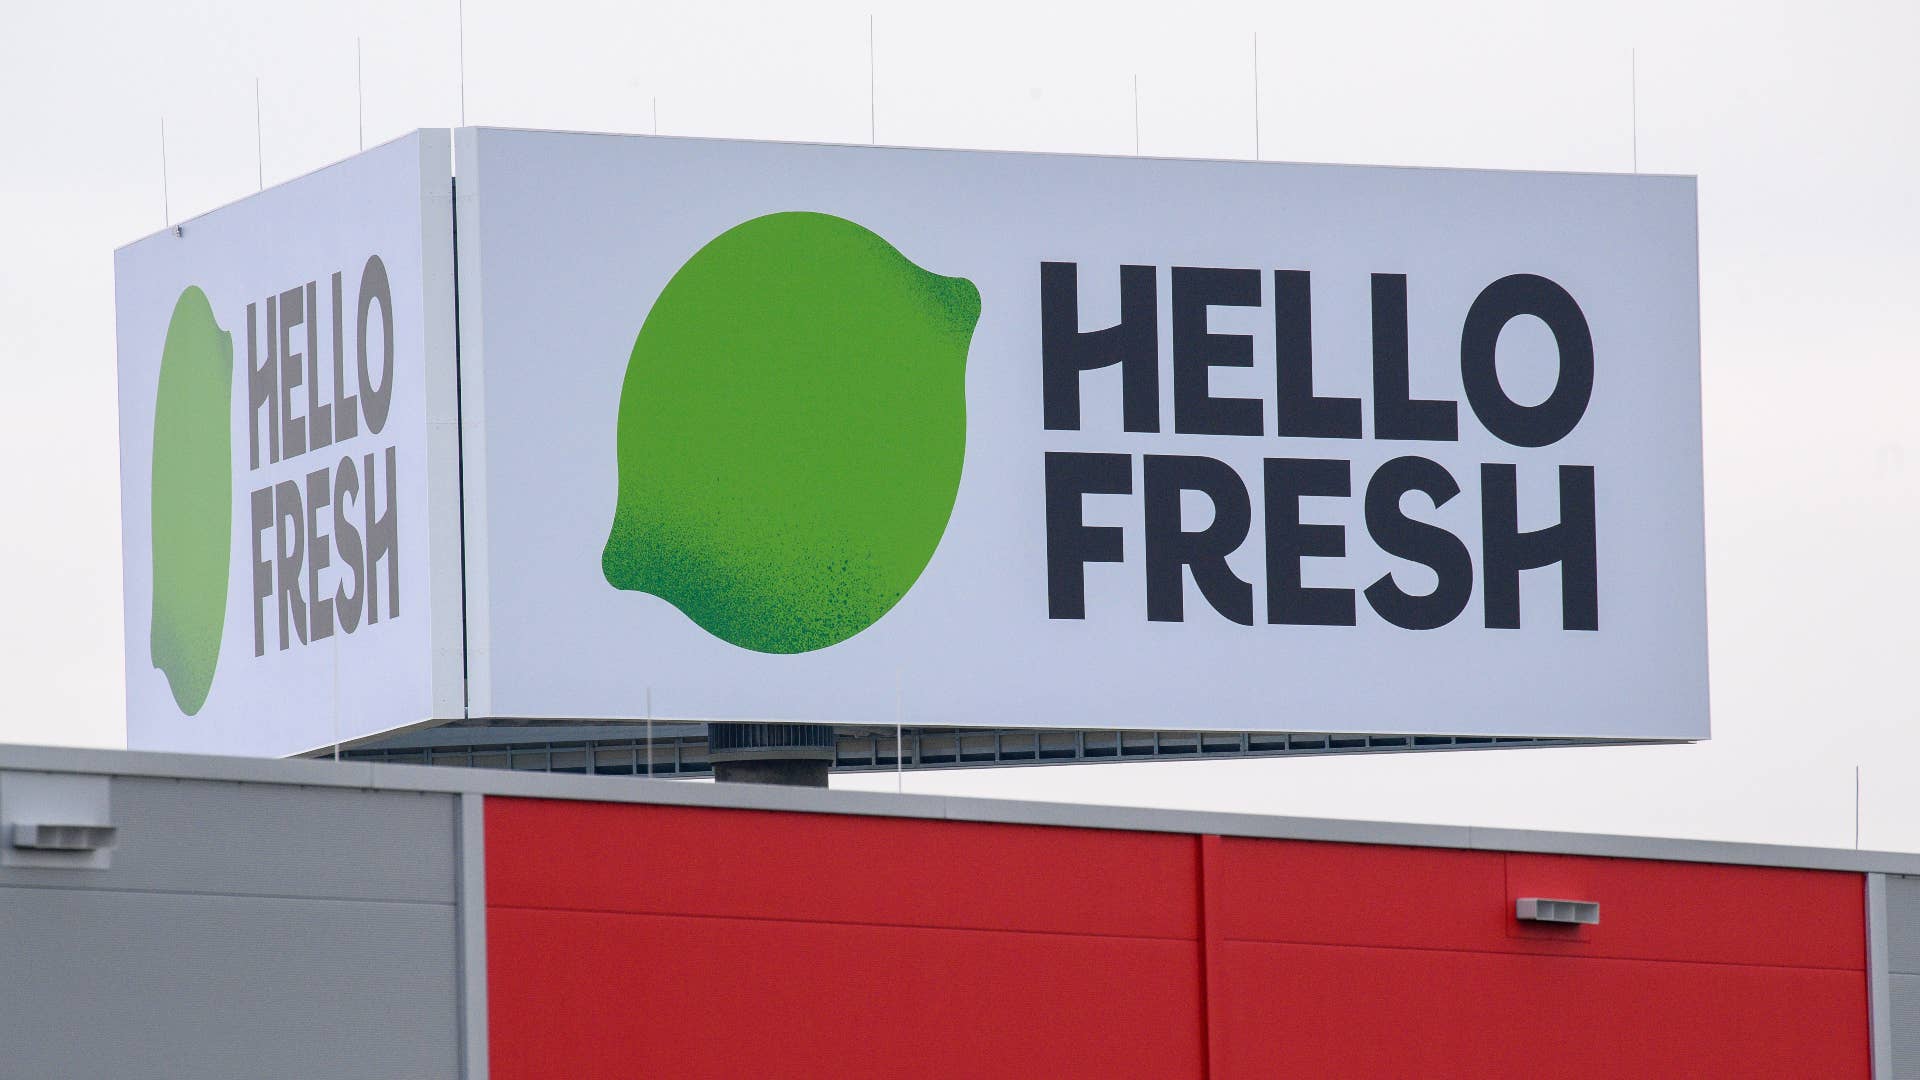 "Hello Fresh" is written on a sign above the roof of one of the company's halls.